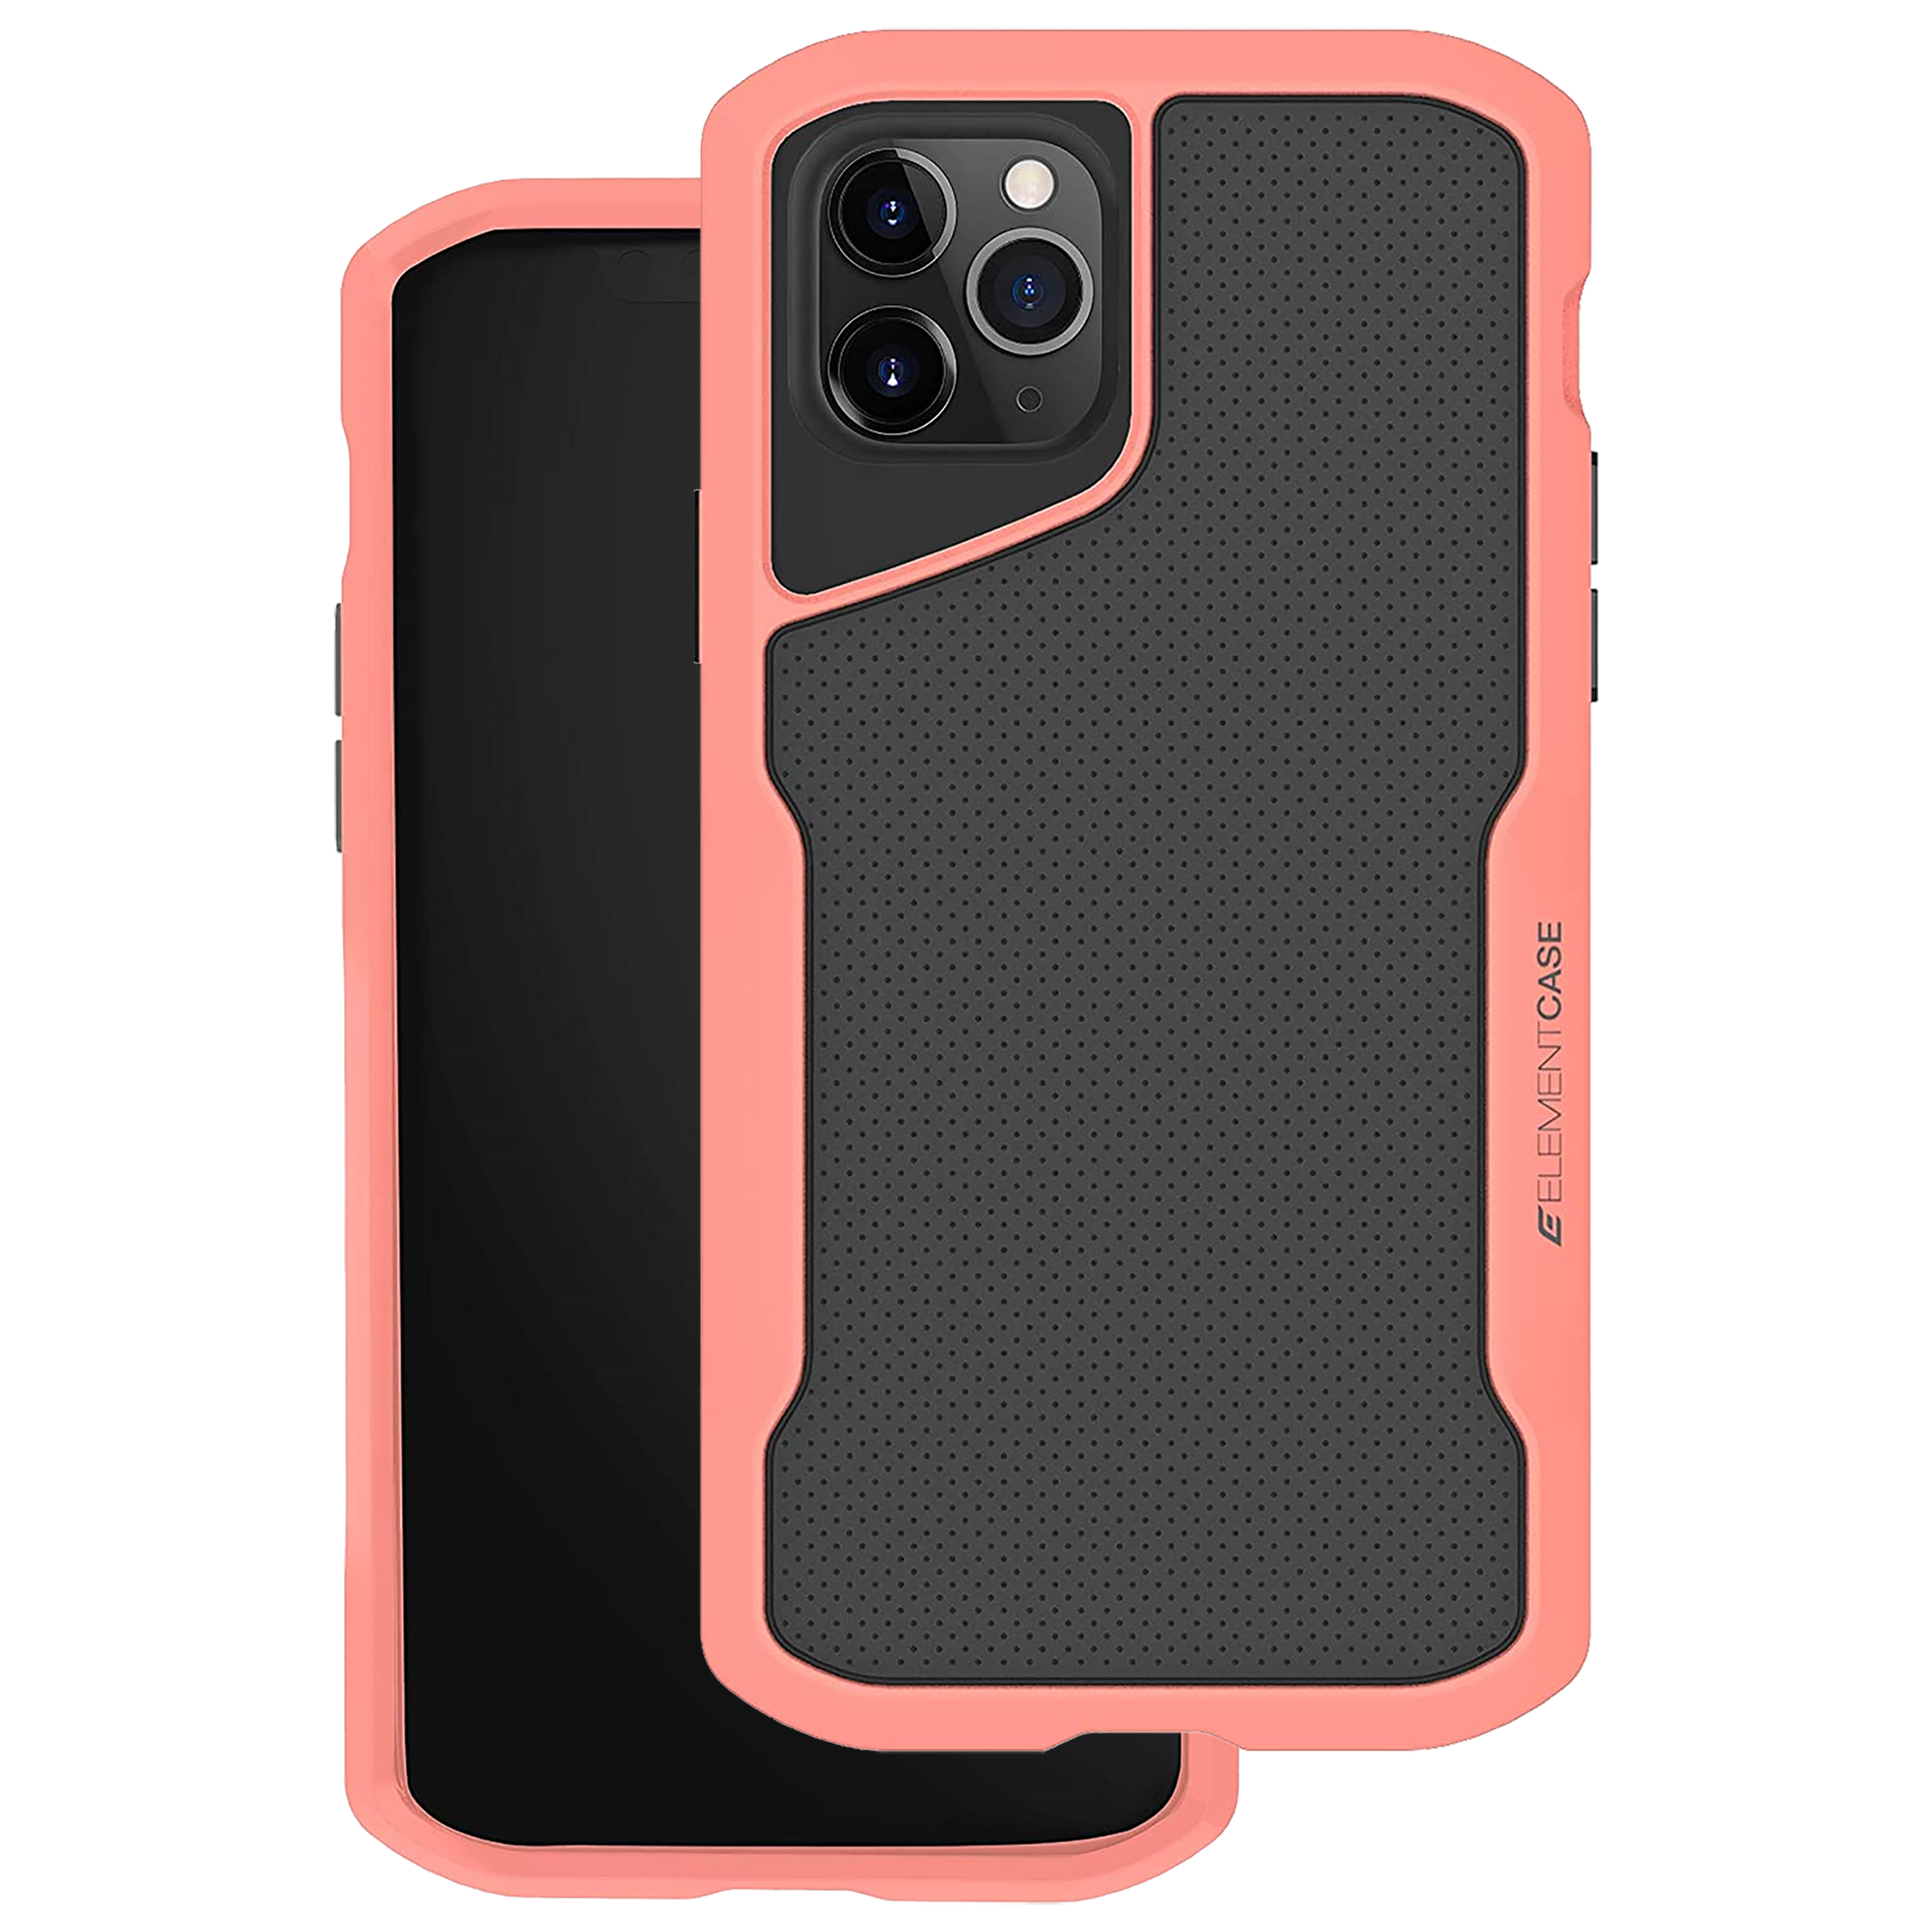 Element Case Shadow Thermoplastic Polyurethane Back Case For iPhone 11 Pro Max (Mil-Spec Drop Protection, EMT-322-192FX-03, Melon)_1